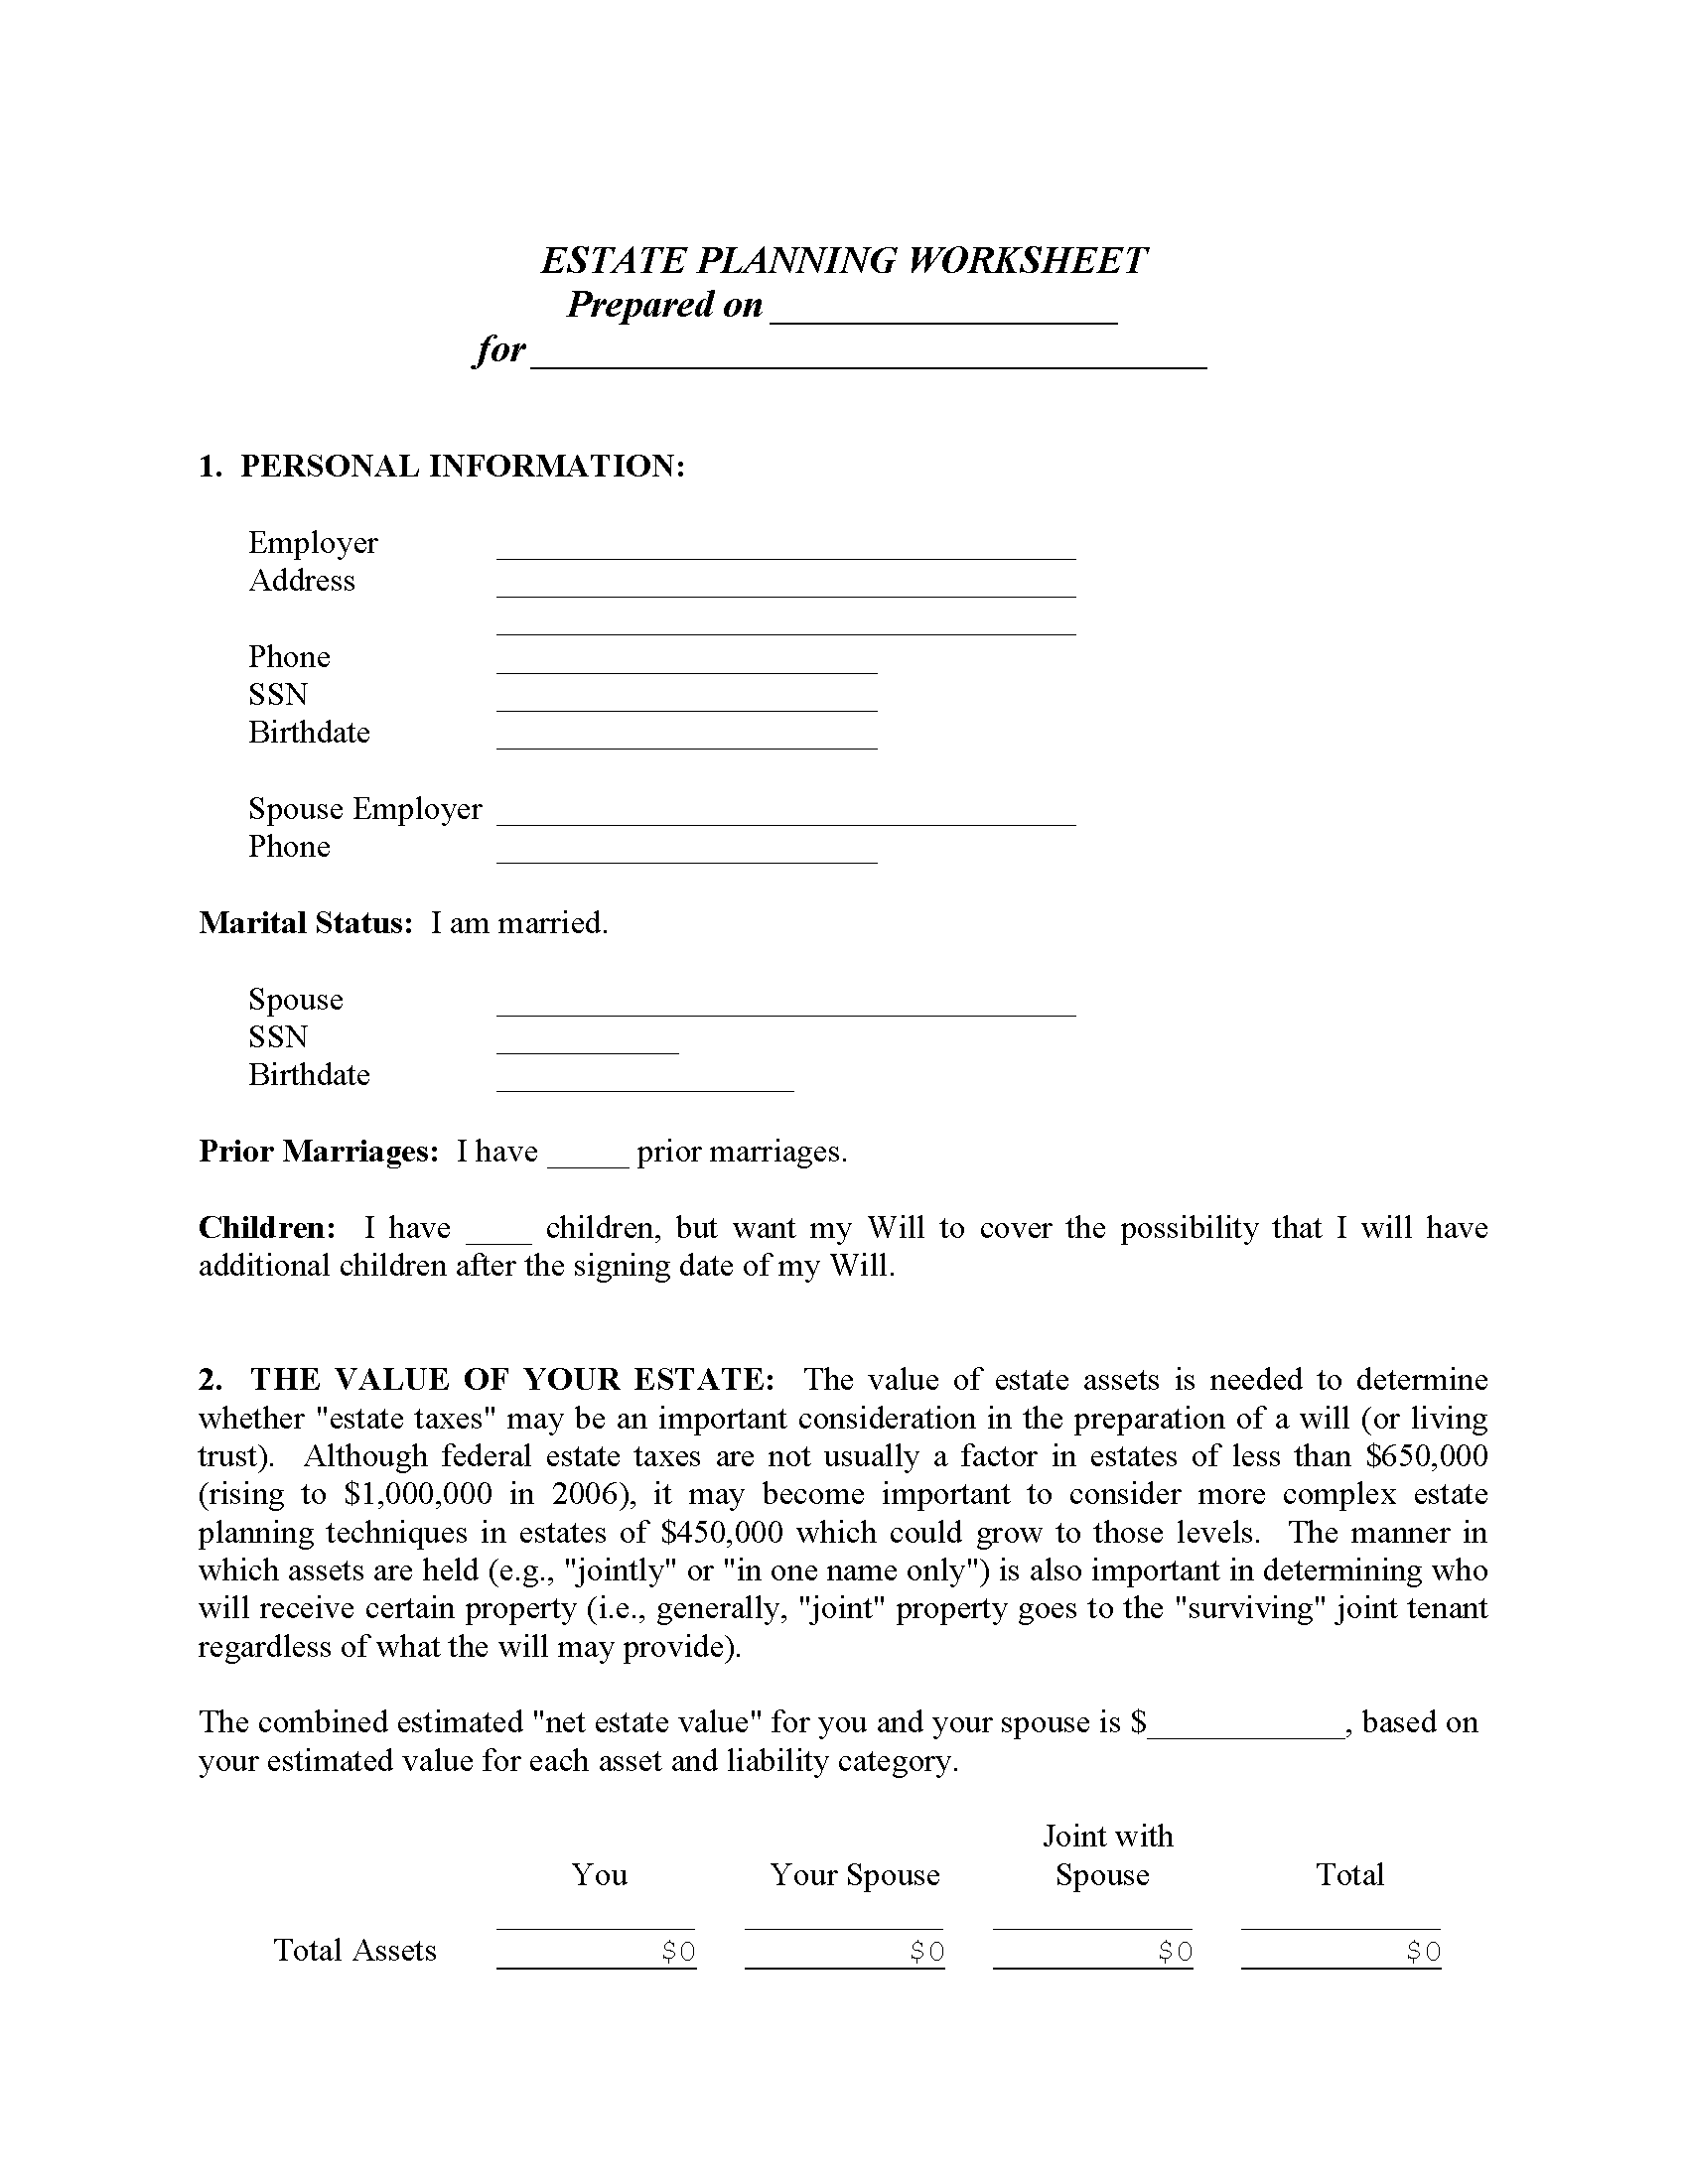 fillable-estate-forms-printable-forms-free-online